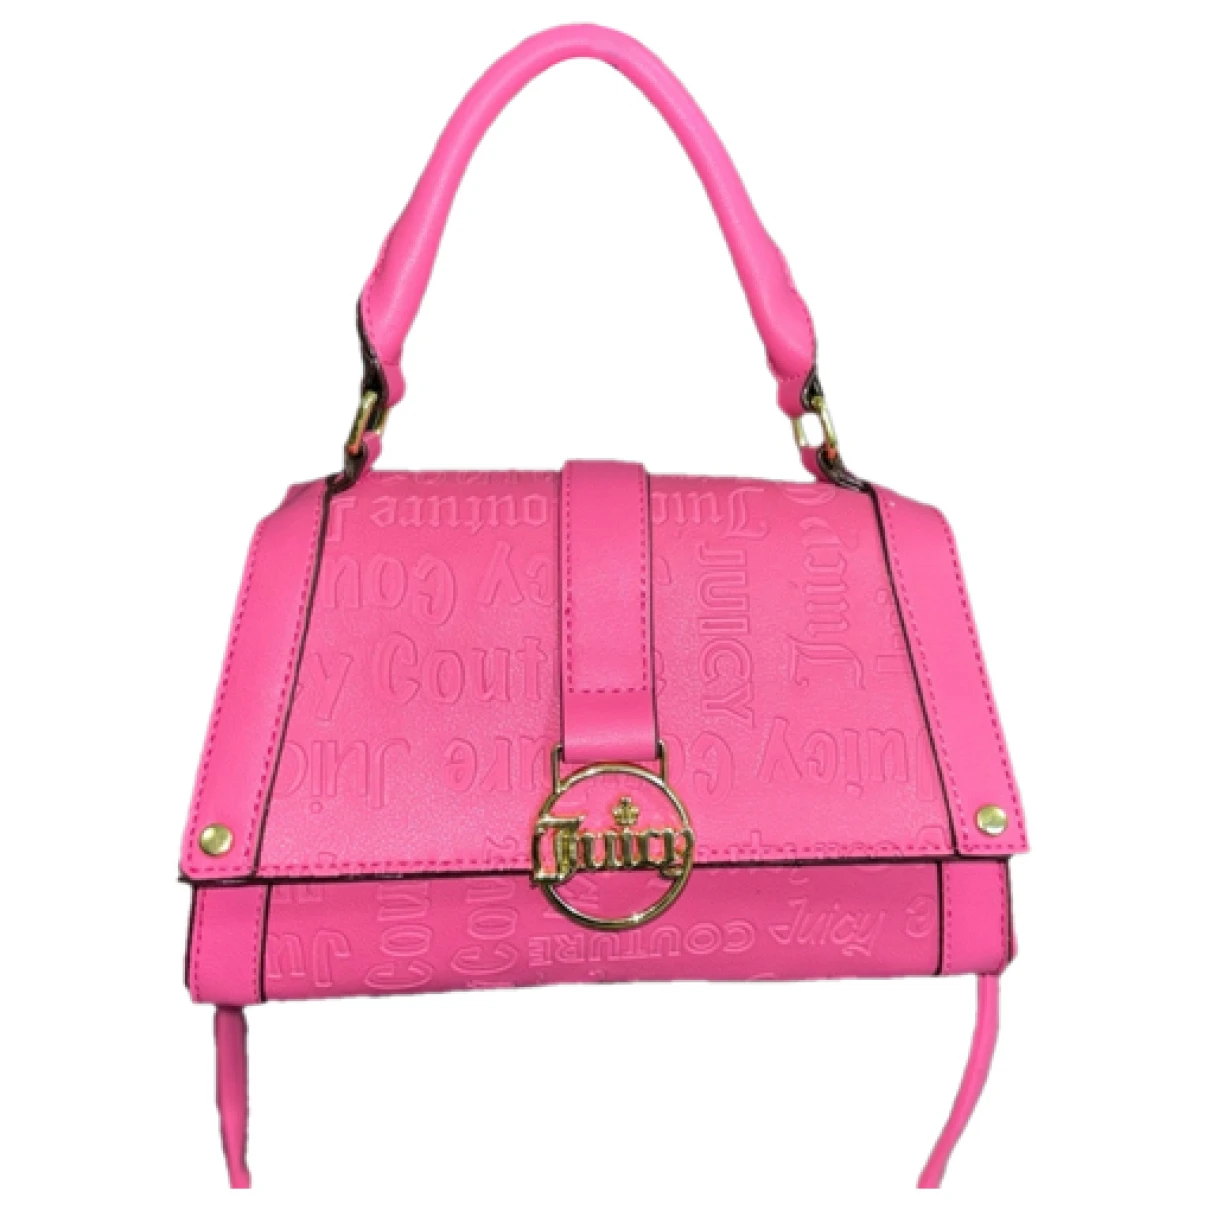 Pre-owned Juicy Couture Leather Handbag In Pink